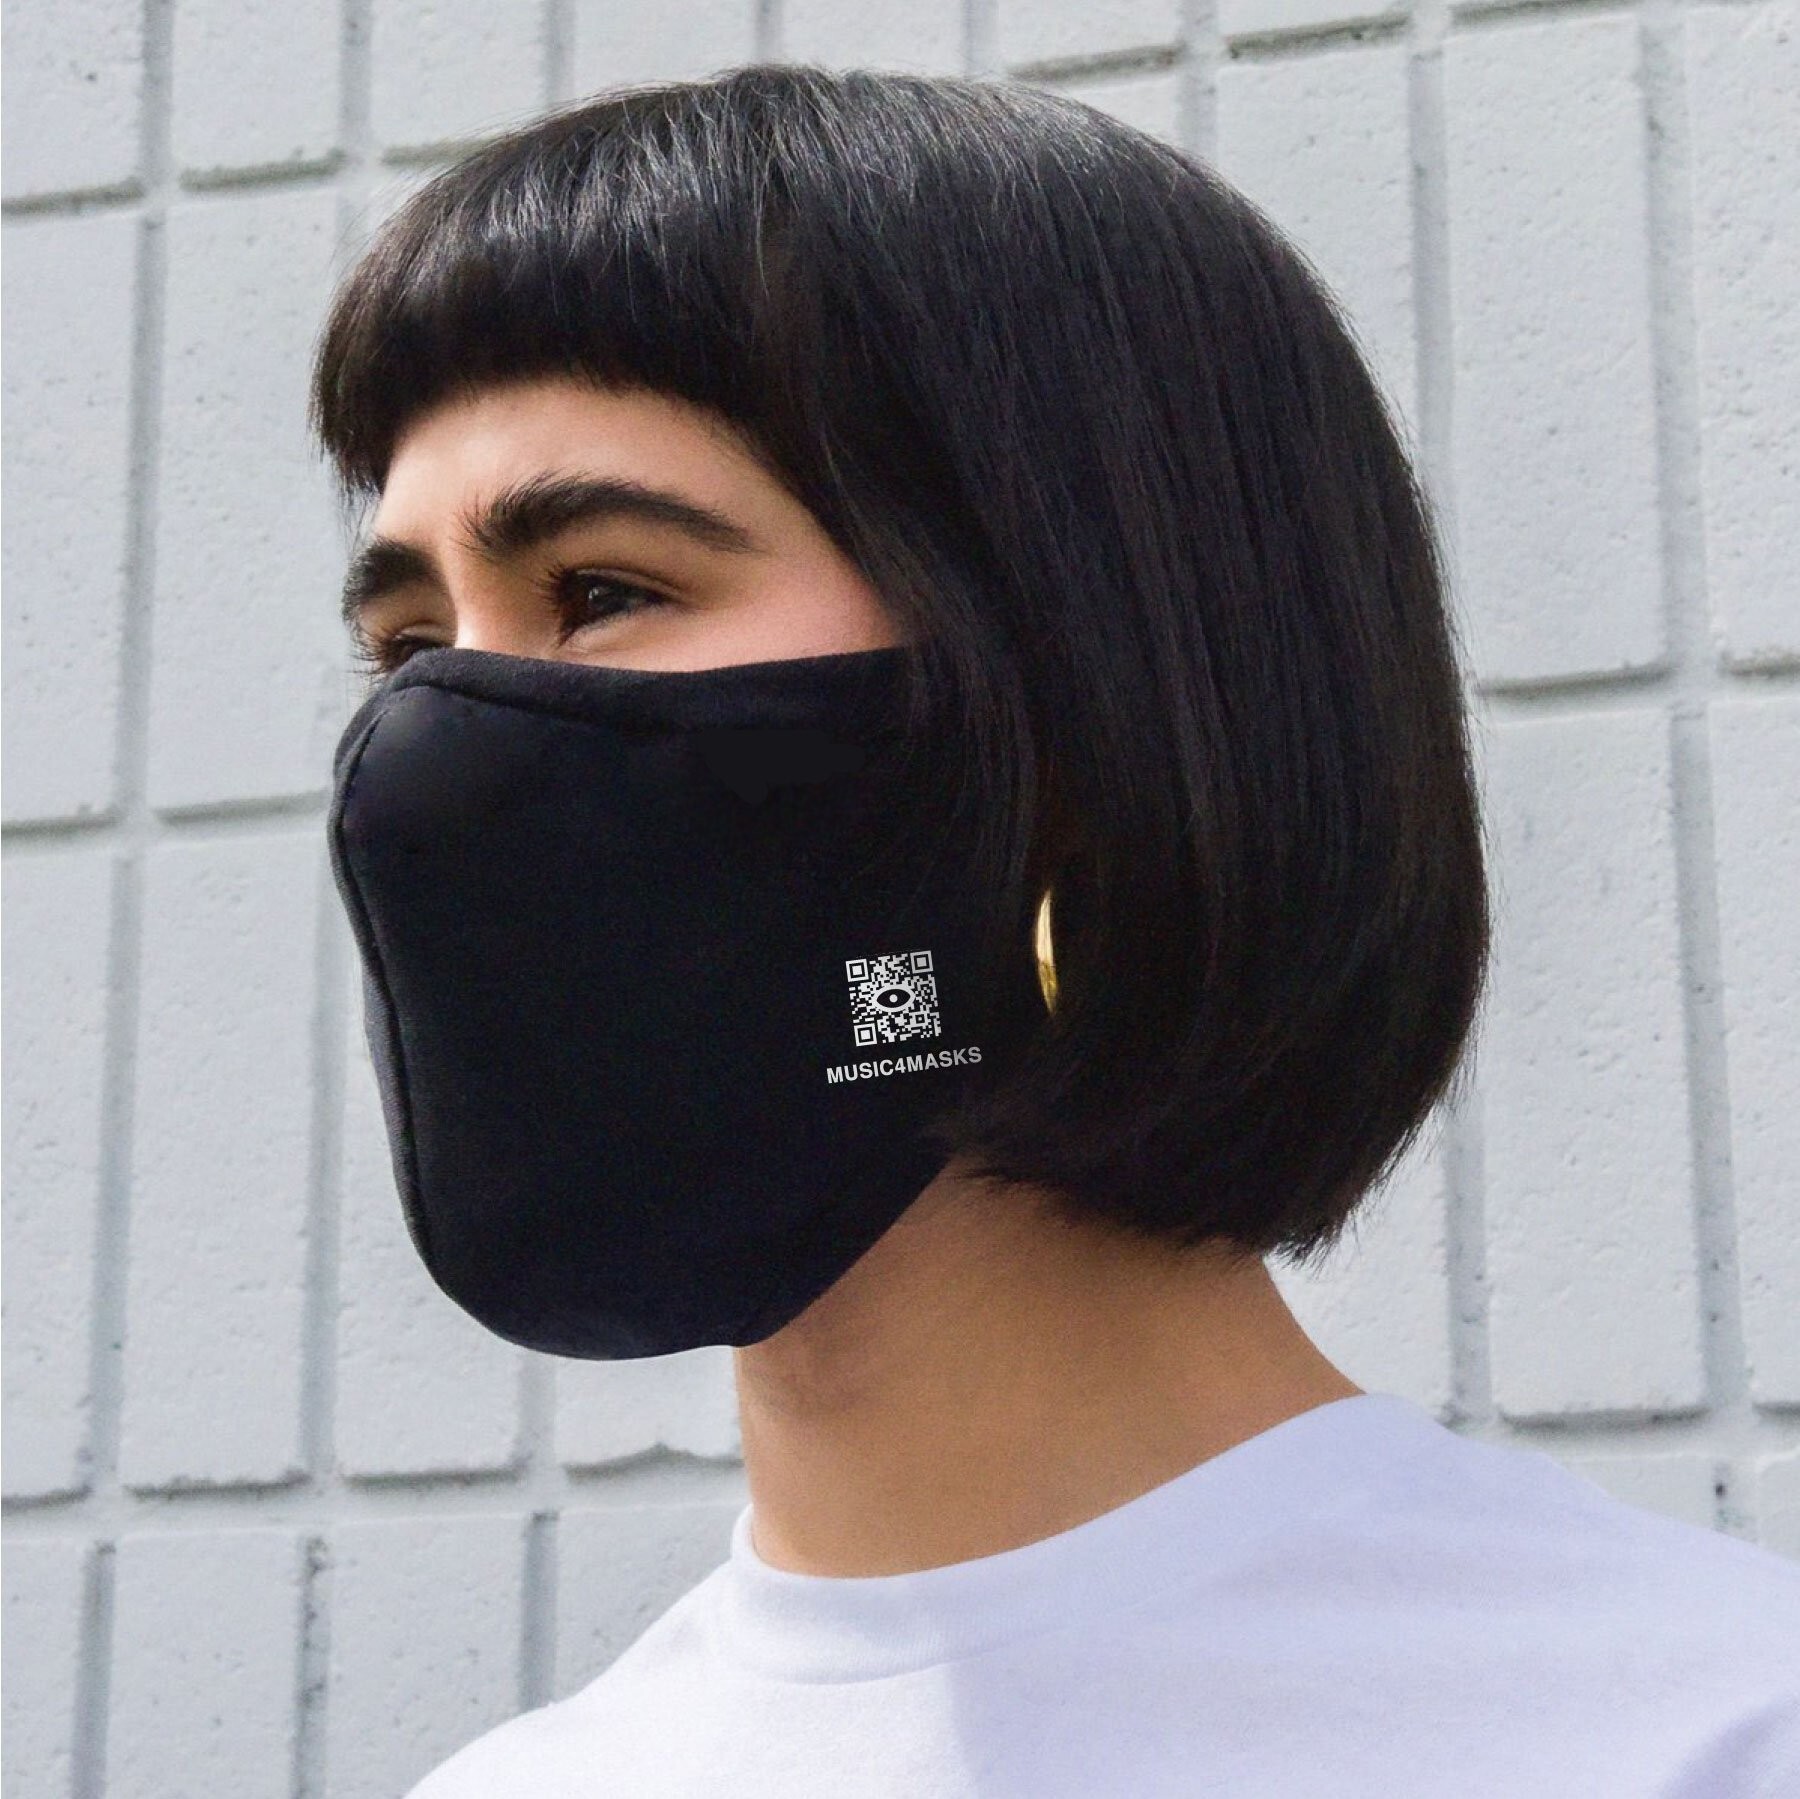 Louis Vuitton To Sell $1,000 Face Shield